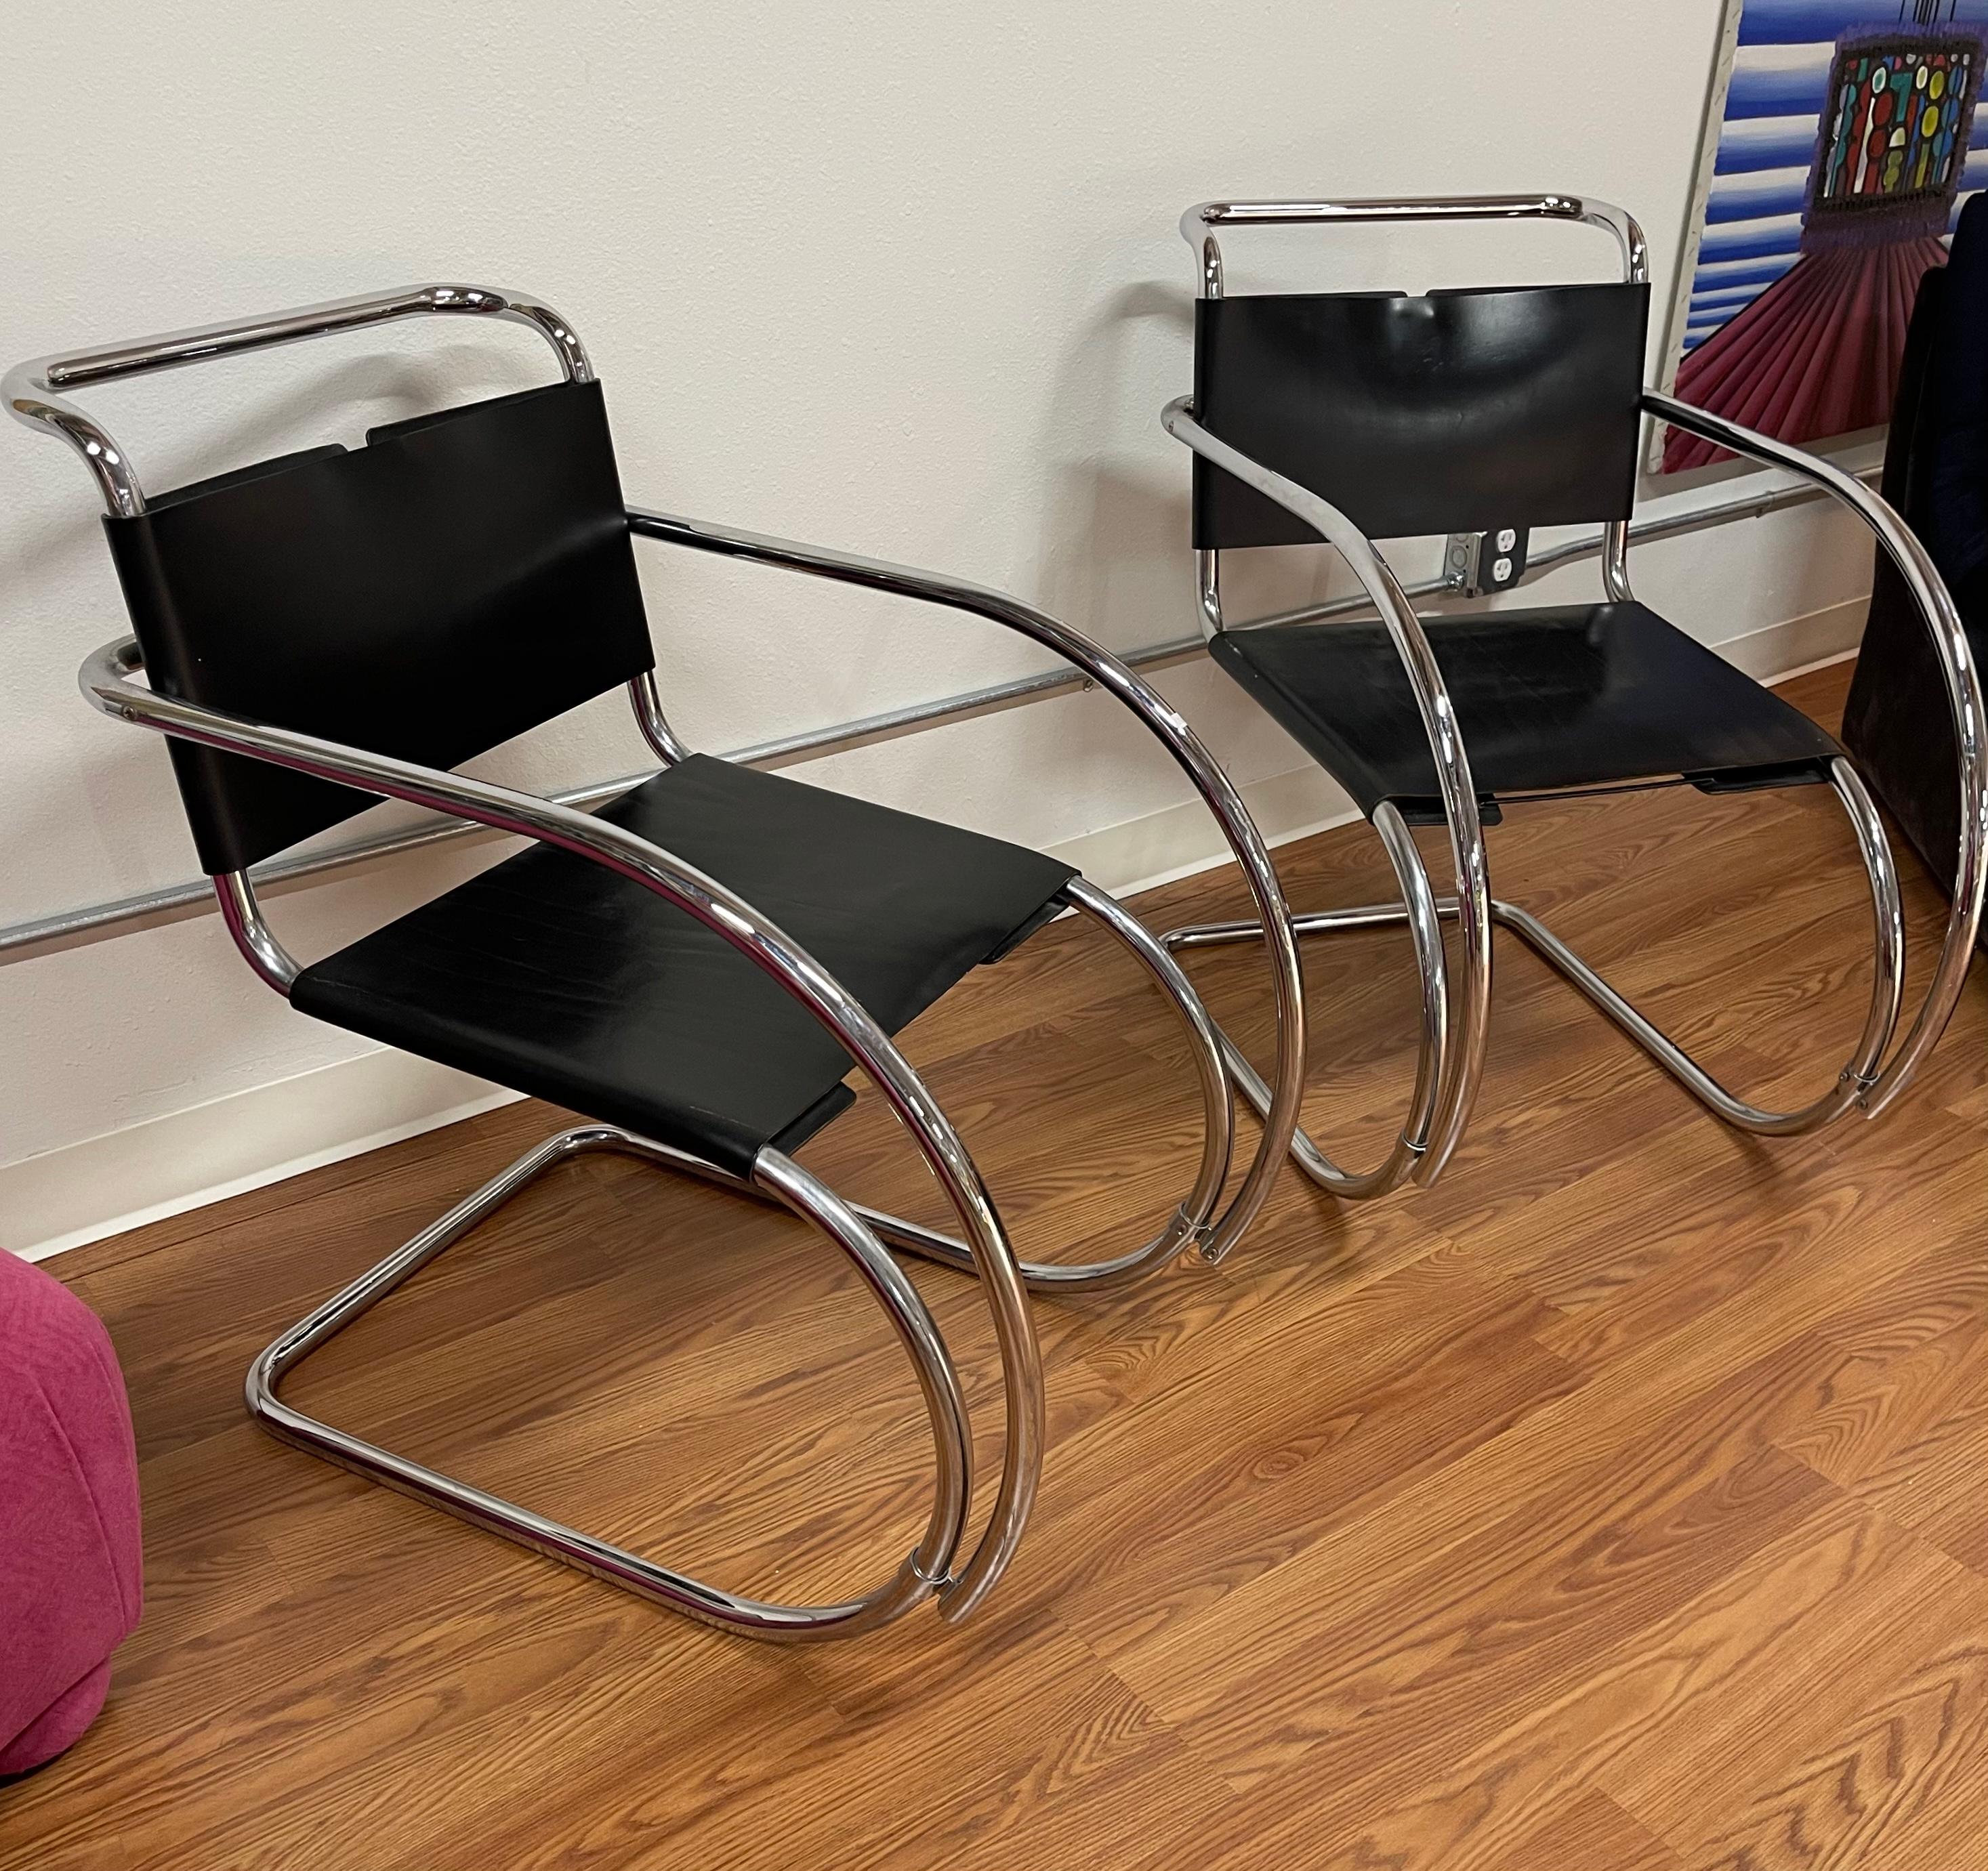 A pair of vintage 1970's MR chairs by Stendig in black leather. Chairs are in good condition for their age. Leather is a bit stiff and has scuffing. The chrome has some marks as well. Great vintage chairs.